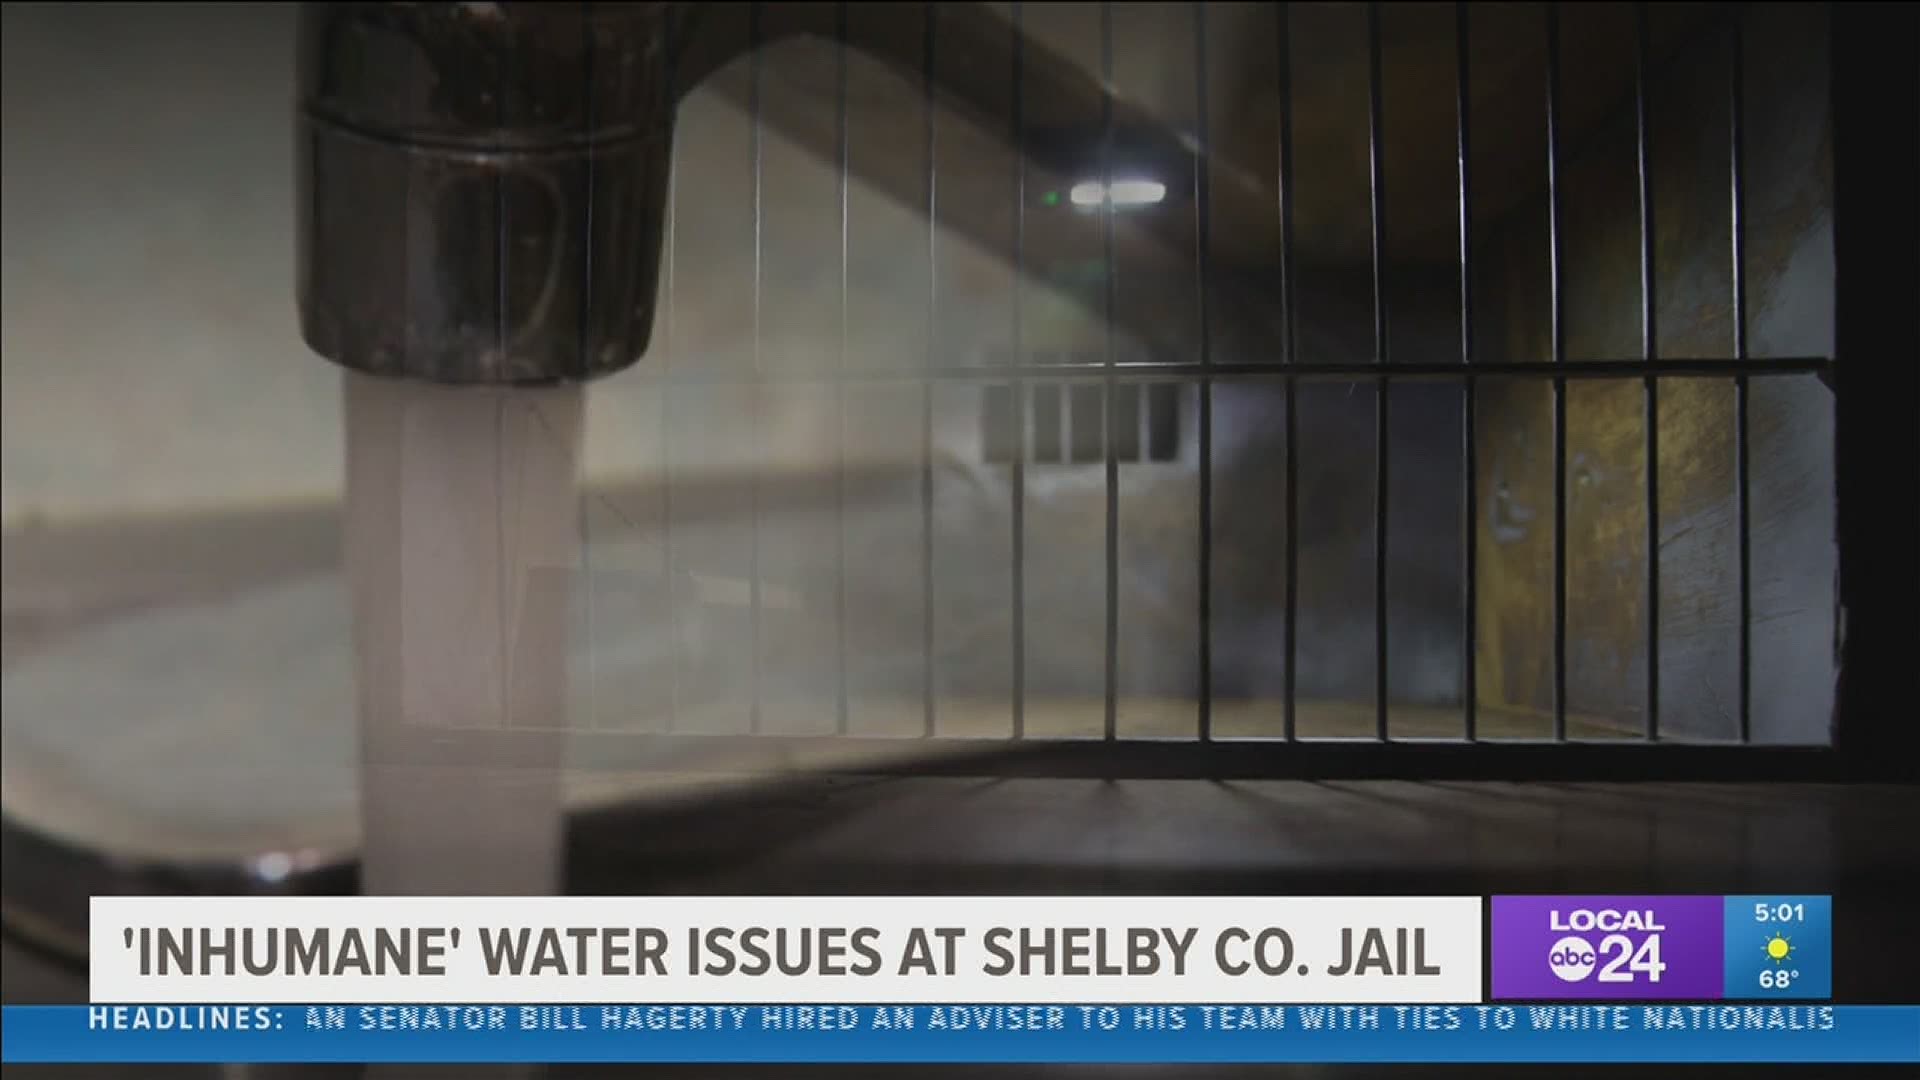 Shelby Co. Sheriff's Office says water pressure is improving but trucks filled with water are still being hauled to the building and water is being rationed inside.